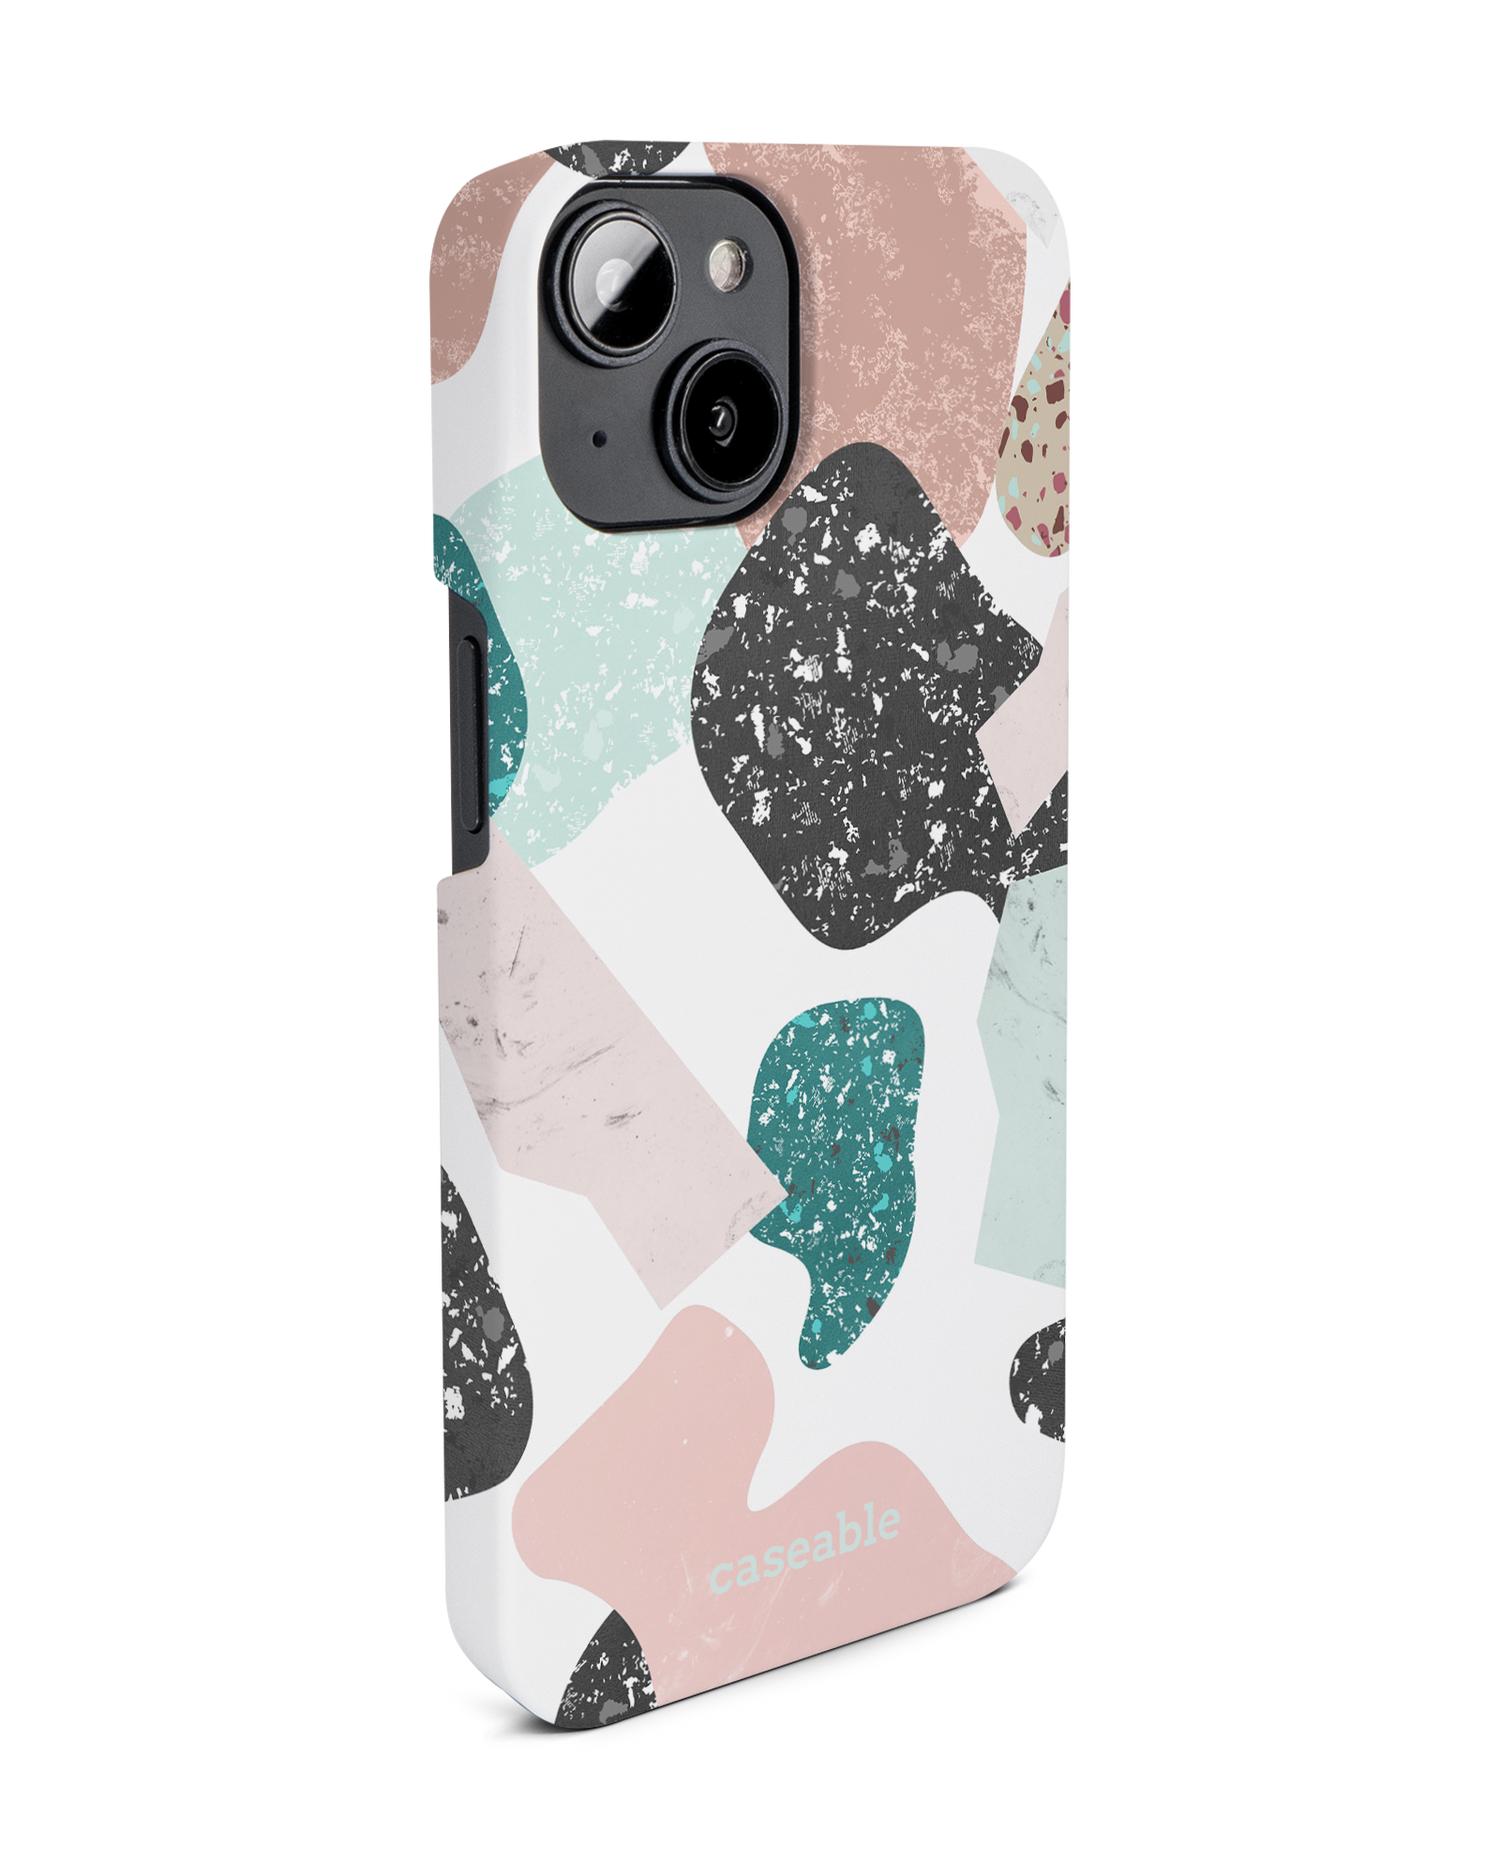 Scattered Shapes Hard Shell Phone Case for Apple iPhone 14: View from the left side